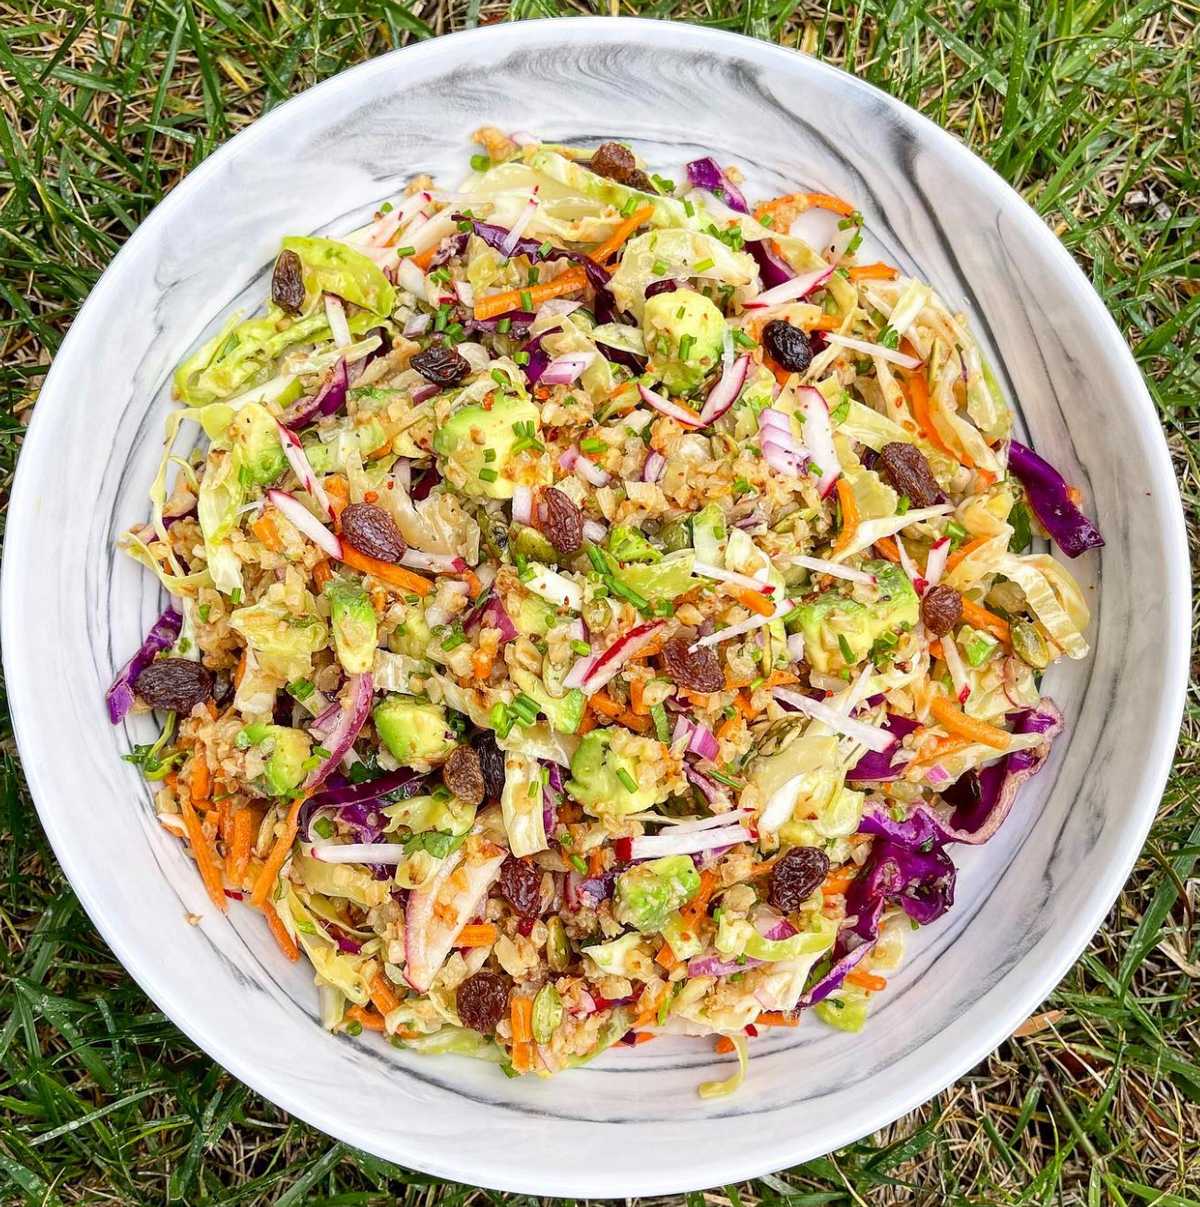 Colorful salad with cabbage, avocado, cauliflower rice in a bowl